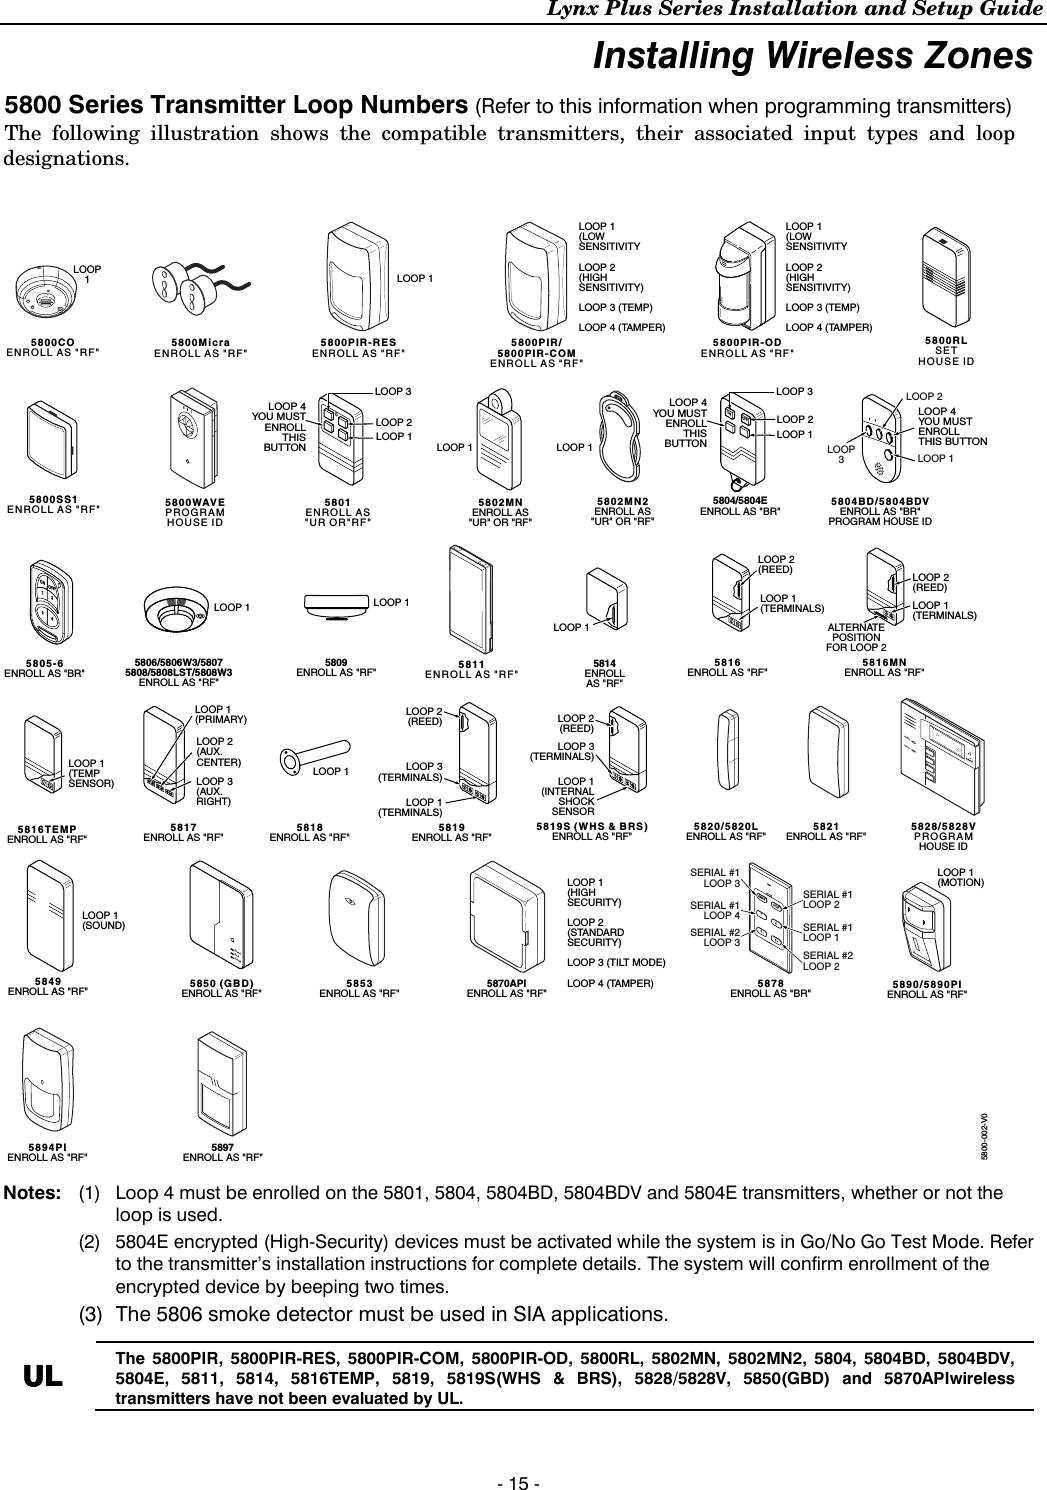 Lynx Plus Series Installation and Setup Guide - 15 - Installing Wireless Zones 5800 Series Transmitter Loop Numbers (Refer to this information when programming transmitters) The following illustration shows the compatible transmitters, their associated input types and loop designations.  LOOP 15806/5806W3/58075808/5808LST/5808W3ENROLL AS &quot;RF&quot;LOOP 15809ENROLL AS &quot;RF&quot;5818ENROLL AS &quot;RF&quot;LOOP 1LOOP 15814ENROLLAS &quot;RF&quot;5800-002-V0LOOP 1(MOTION)5897ENROLL AS &quot;RF&quot;5890/5890PIENROLL AS &quot;RF&quot;LOOP 1LOOP 15802MNENROLL AS&quot;UR&quot; OR &quot;RF&quot;5805-6ENROLL AS &quot;BR&quot;5804BD/5804BDVENROLL AS &quot;BR&quot;PROGRAM HOUSE IDLOOP 4YOU MUSTENROLLTHIS BUTTONLOOP3LOOP 1LOOP 2•••••••••••••••••••5804/5804EENROLL AS &quot;BR&quot;5816TEMPENROLL AS &quot;RF&quot;LOOP 1(TEMPSENSOR)5817ENROLL AS &quot;RF&quot;LOOP 2(AUX.CENTER)LOOP 1(PRIMARY)LOOP 3(AUX.RIGHT)5816ENROLL AS &quot;RF&quot;LOOP 1(TERMINALS)LOOP 2(REED)5816MNENROLL AS &quot;RF&quot;LOOP 1(TERMINALS)ALTERNATEPOSITIONFOR LOOP 2LOOP 2(REED)LOOP 3(TERMINALS)5828/5828VPROGRAMHOUSE ID5821ENROLL AS &quot;RF&quot;5820/5820LENROLL AS &quot;RF&quot;5819S (WHS &amp; BRS)ENROLL AS &quot;RF&quot;LOOP 1(INTERNALSHOCKSENSORLOOP 2(REED)5819ENROLL AS &quot;RF&quot;LOOP 2(REED)LOOP 3(TERMINALS)LOOP 1(TERMINALS)5800WAVEPROGRAMHOUSE ID5800PIR-ODENROLL AS &quot;RF&quot;5800PIR/5800PIR-COMENROLL AS &quot;RF&quot;5811ENROLL AS &quot;RF&quot;5800PIR-RESENROLL AS &quot;RF&quot;5800MicraENROLL AS &quot;RF&quot;5800COENROLL AS &quot;RF&quot;5801ENROLL AS&quot;UR OR&quot;RF&quot;5800SS1ENROLL AS &quot;RF&quot;5800RLSETHOUSE IDLOOP 3LOOP 1LOOP 1(LOWSENSITIVITYLOOP 2(HIGHSENSITIVITY)LOOP 3 (TEMP)LOOP 4 (TAMPER)LOOP 1(HIGHSECURITY)LOOP 2(STANDARDSECURITY)LOOP 3 (TILT MODE)LOOP 4 (TAMPER)LOOP 1(LOWSENSITIVITYLOOP 2(HIGHSENSITIVITY)LOOP 3 (TEMP)LOOP 4 (TAMPER)LOOP 1LOOP 2LOOP 4YOU MUSTENROLLTHISBUTTON5849ENROLL AS &quot;RF&quot;5894PIENROLL AS &quot;RF&quot;LOOP 1(SOUND)5802MN2ENROLL AS&quot;UR&quot; OR &quot;RF&quot;LOOP15878ENROLL AS &quot;BR&quot;5870APIENROLL AS &quot;RF&quot;5853ENROLL AS &quot;RF&quot;5850 (GBD)ENROLL AS &quot;RF&quot;(Green)(Red)(Yellow)ARMEDREADY4321OFFONLOOP 4YOU MUSTENROLLTHISBUTTONLOOP 1LOOP 2LOOP 3SERIAL #1LOOP 3SERIAL #1LOOP 4SERIAL #2LOOP 3SERIAL #1LOOP 2SERIAL #1LOOP 1SERIAL #2LOOP 23AWAY STAY124OFFON  Notes:  (1)  Loop 4 must be enrolled on the 5801, 5804, 5804BD, 5804BDV and 5804E transmitters, whether or not the loop is used.   (2)  5804E encrypted (High-Security) devices must be activated while the system is in Go/No Go Test Mode. Refer to the transmitter’s installation instructions for complete details. The system will confirm enrollment of the encrypted device by beeping two times.   (3)  The 5806 smoke detector must be used in SIA applications.  ULULULUL The 5800PIR, 5800PIR-RES, 5800PIR-COM, 5800PIR-OD, 5800RL, 5802MN, 5802MN2, 5804, 5804BD, 5804BDV, 5804E, 5811, 5814, 5816TEMP, 5819, 5819S(WHS &amp; BRS), 5828/5828V, 5850(GBD) and 5870APIwireless transmitters have not been evaluated by UL. 